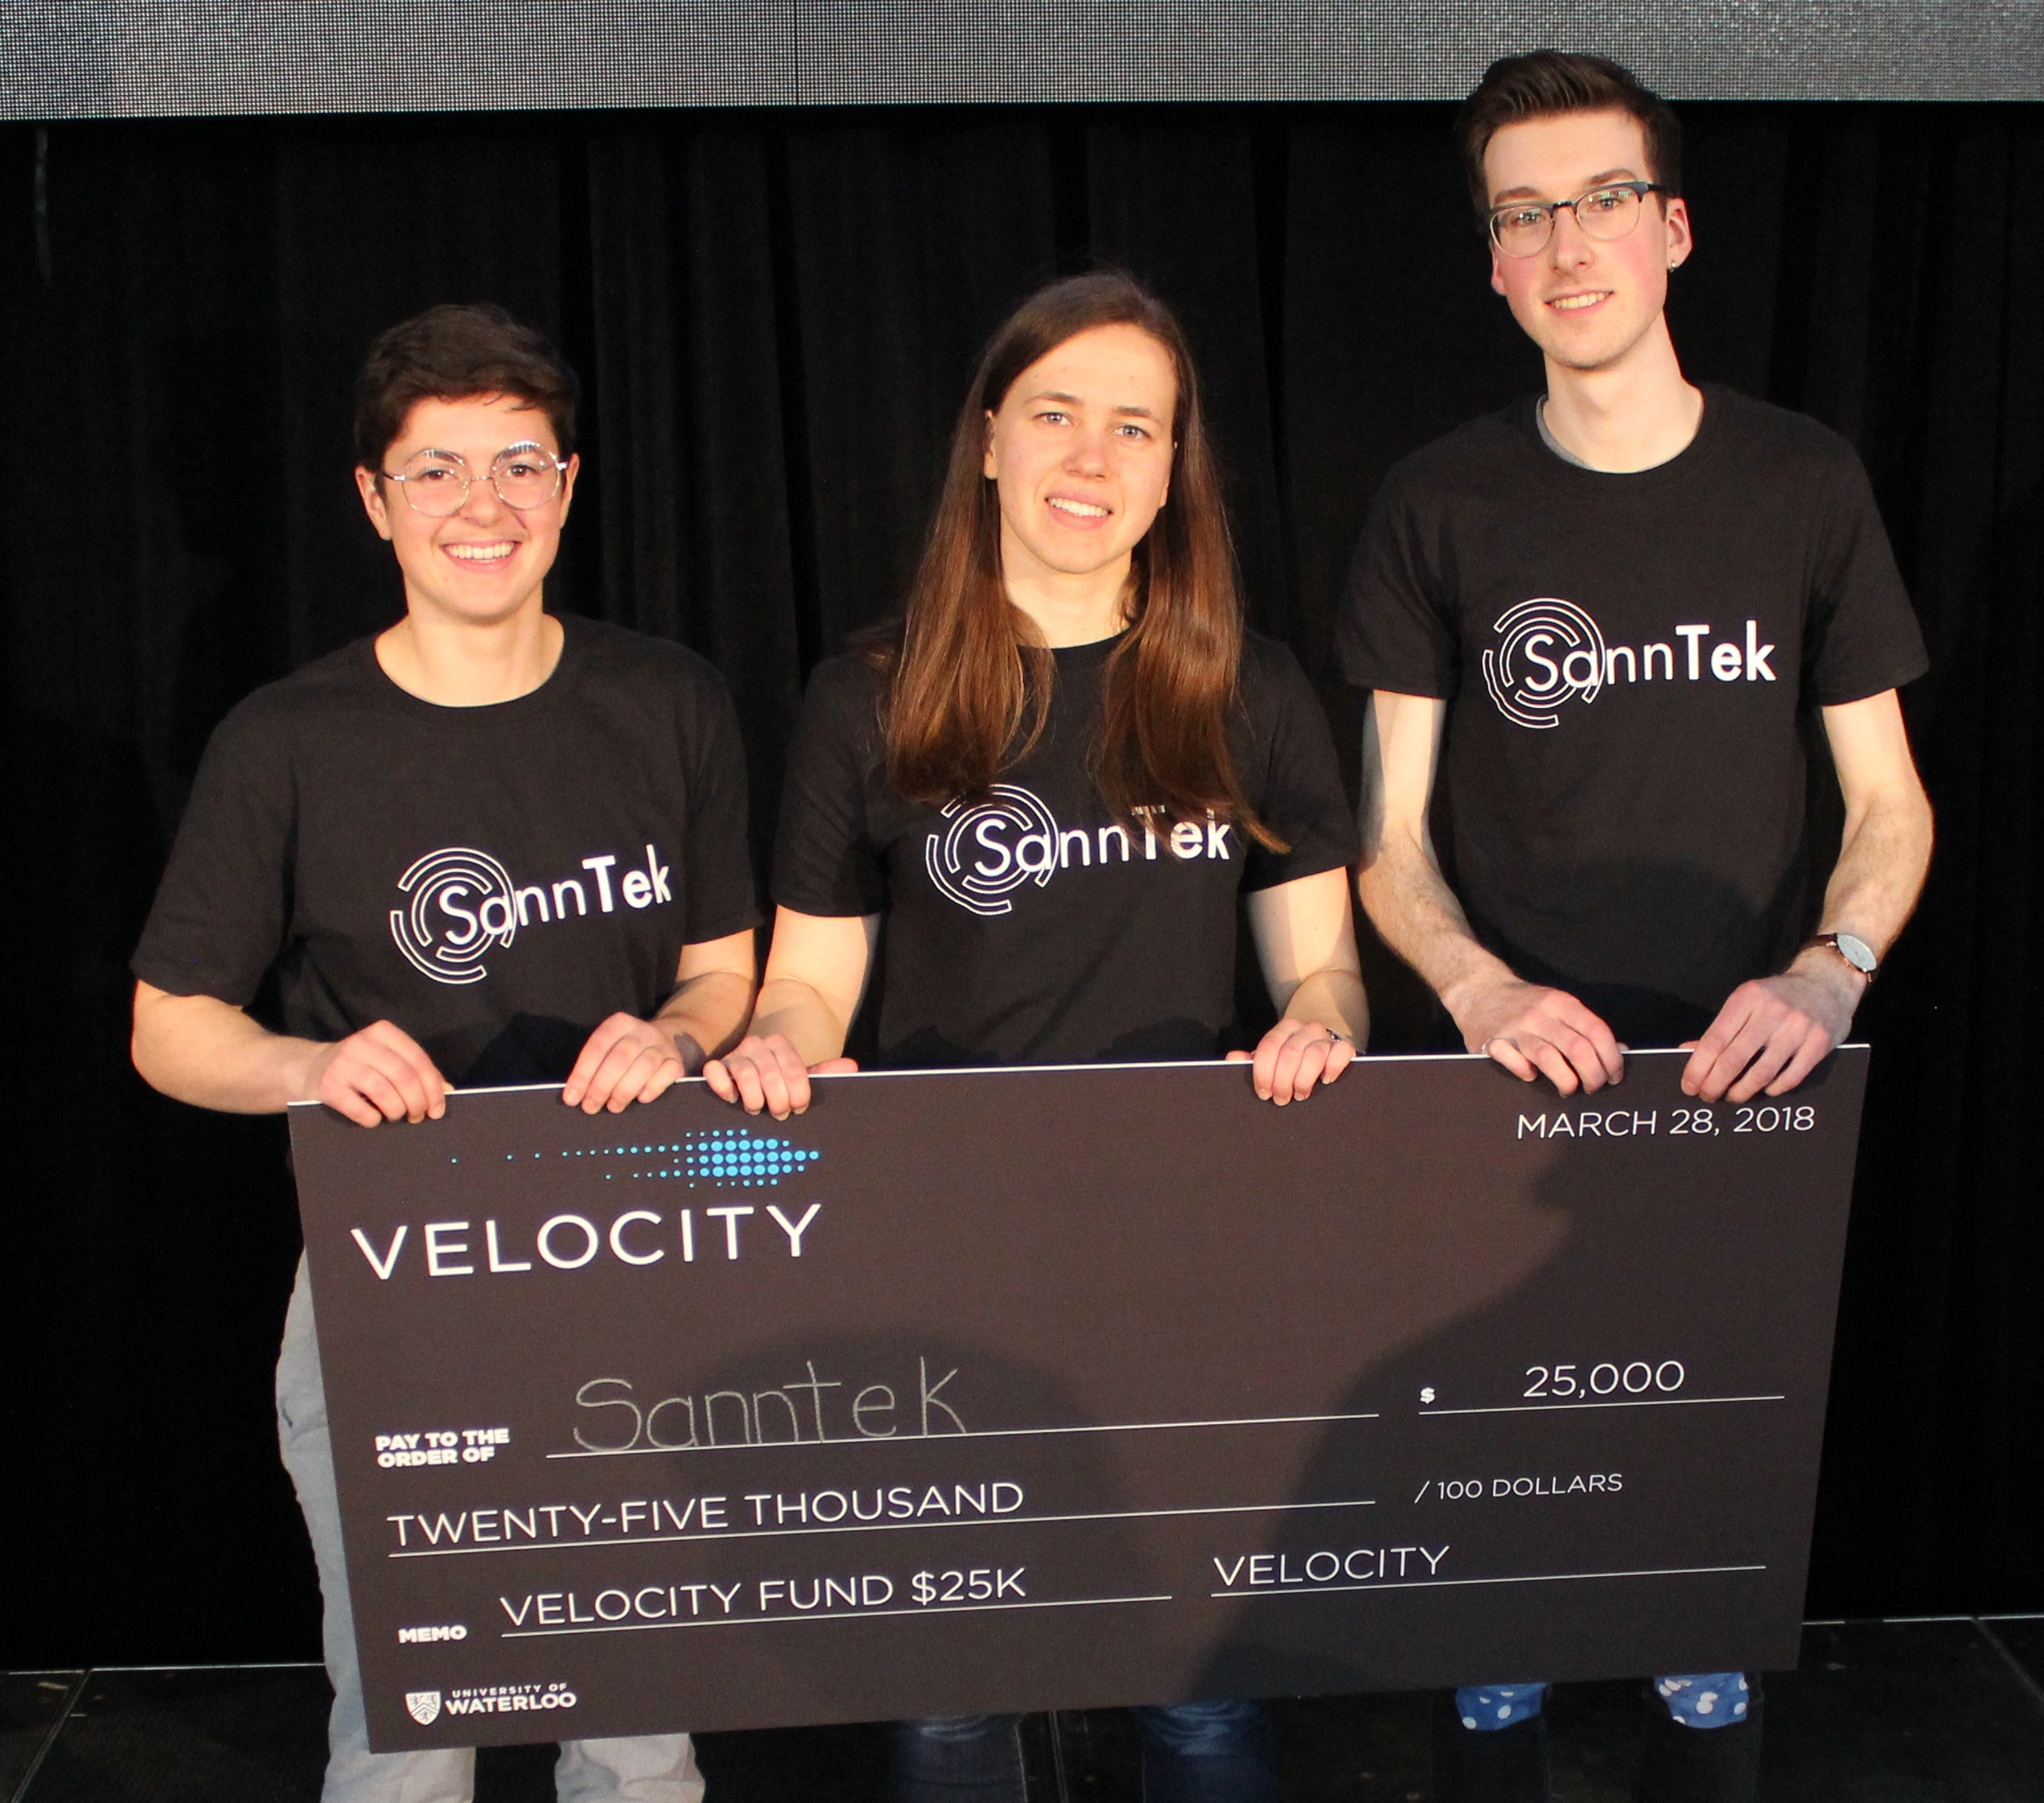 Members of SannTek celebrate their $25,000 win at the Velocity Fund Finals today.